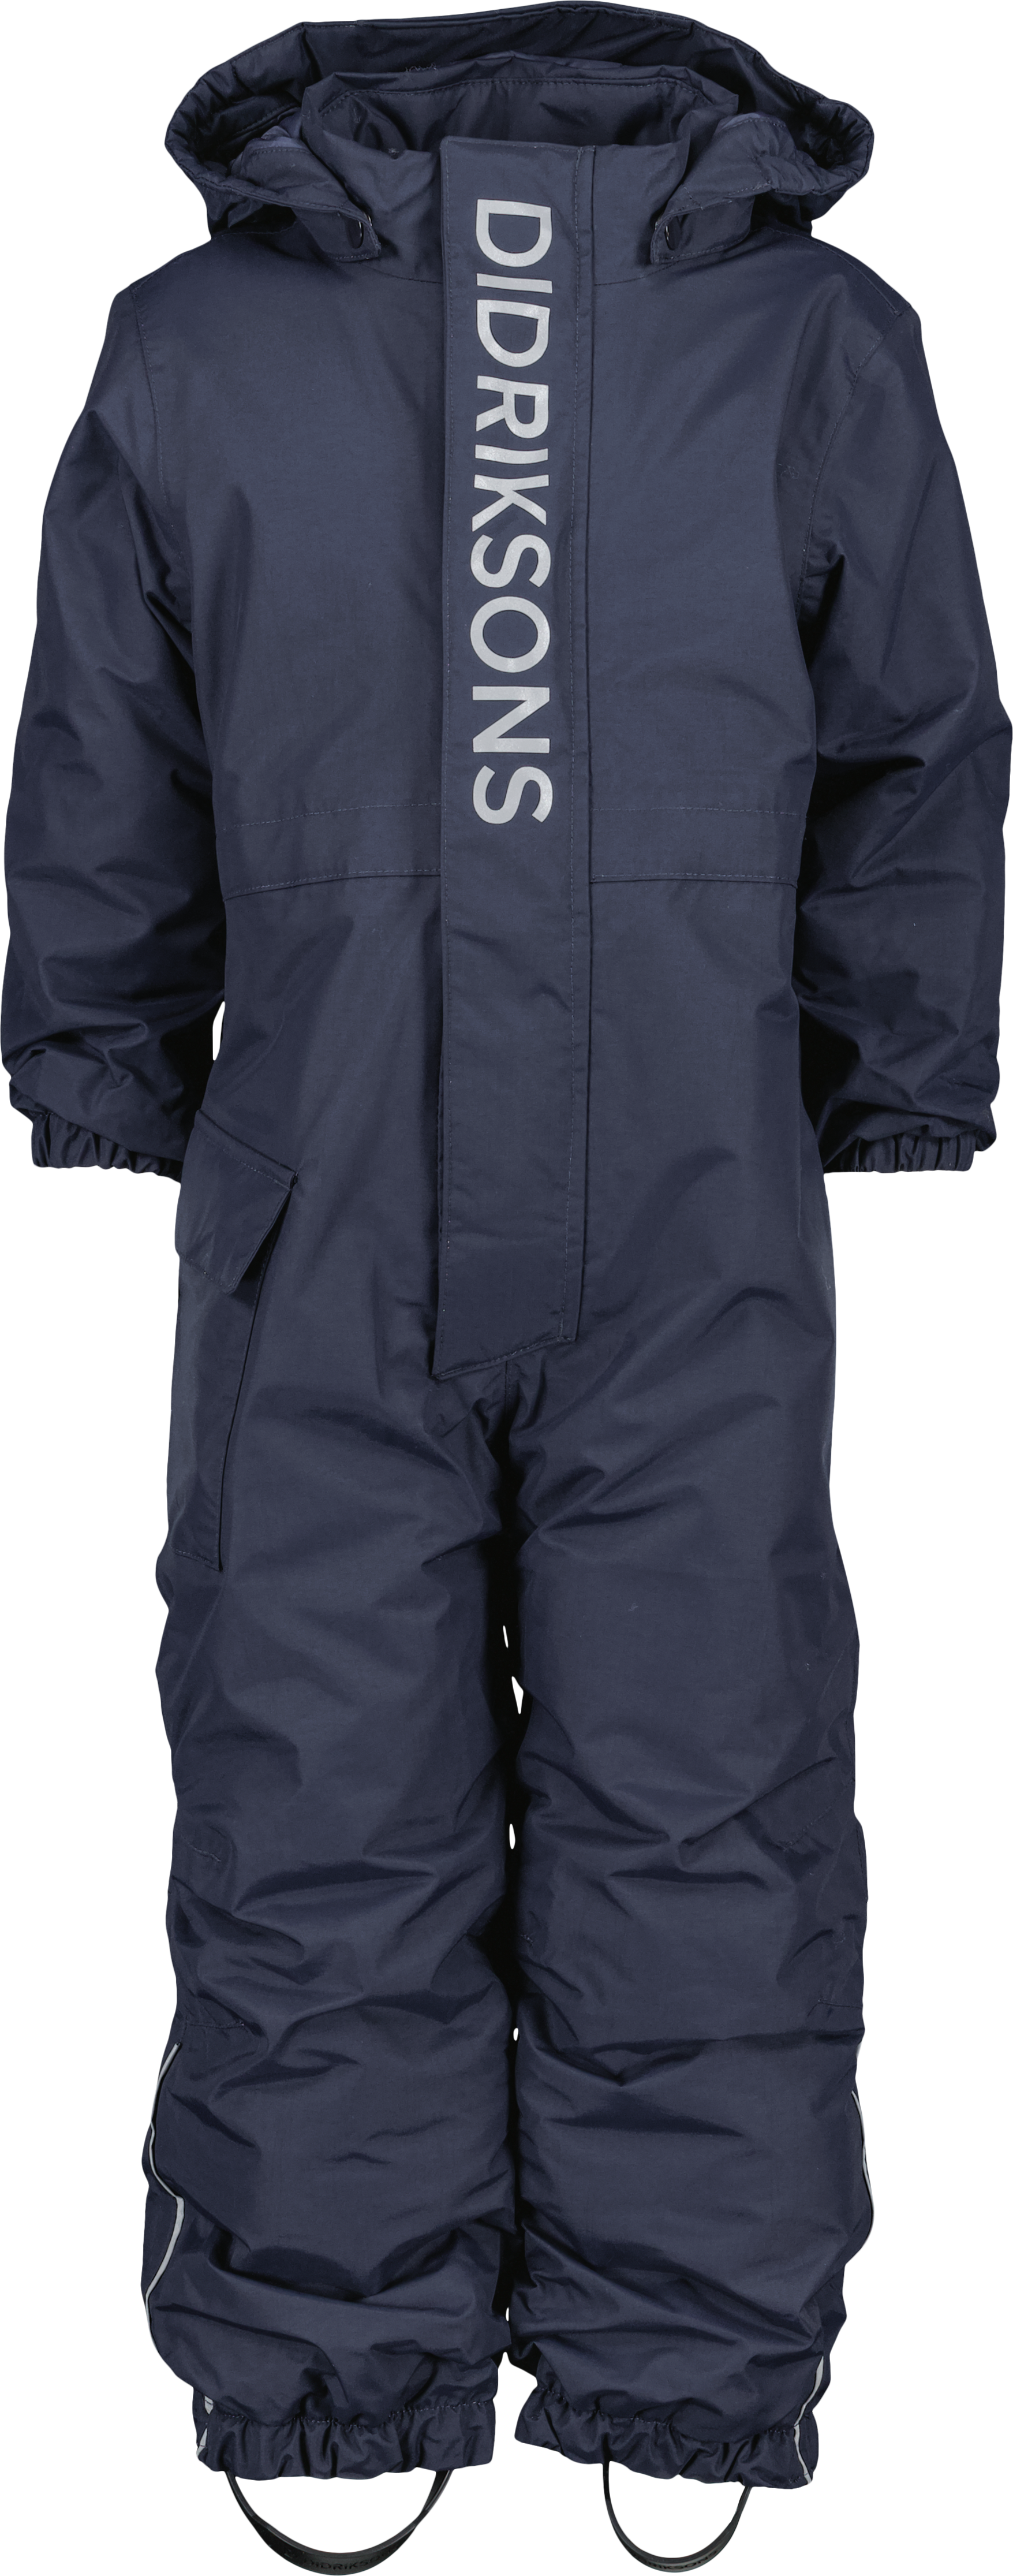 Didriksons Kids’ Rio Coverall 2 Navy